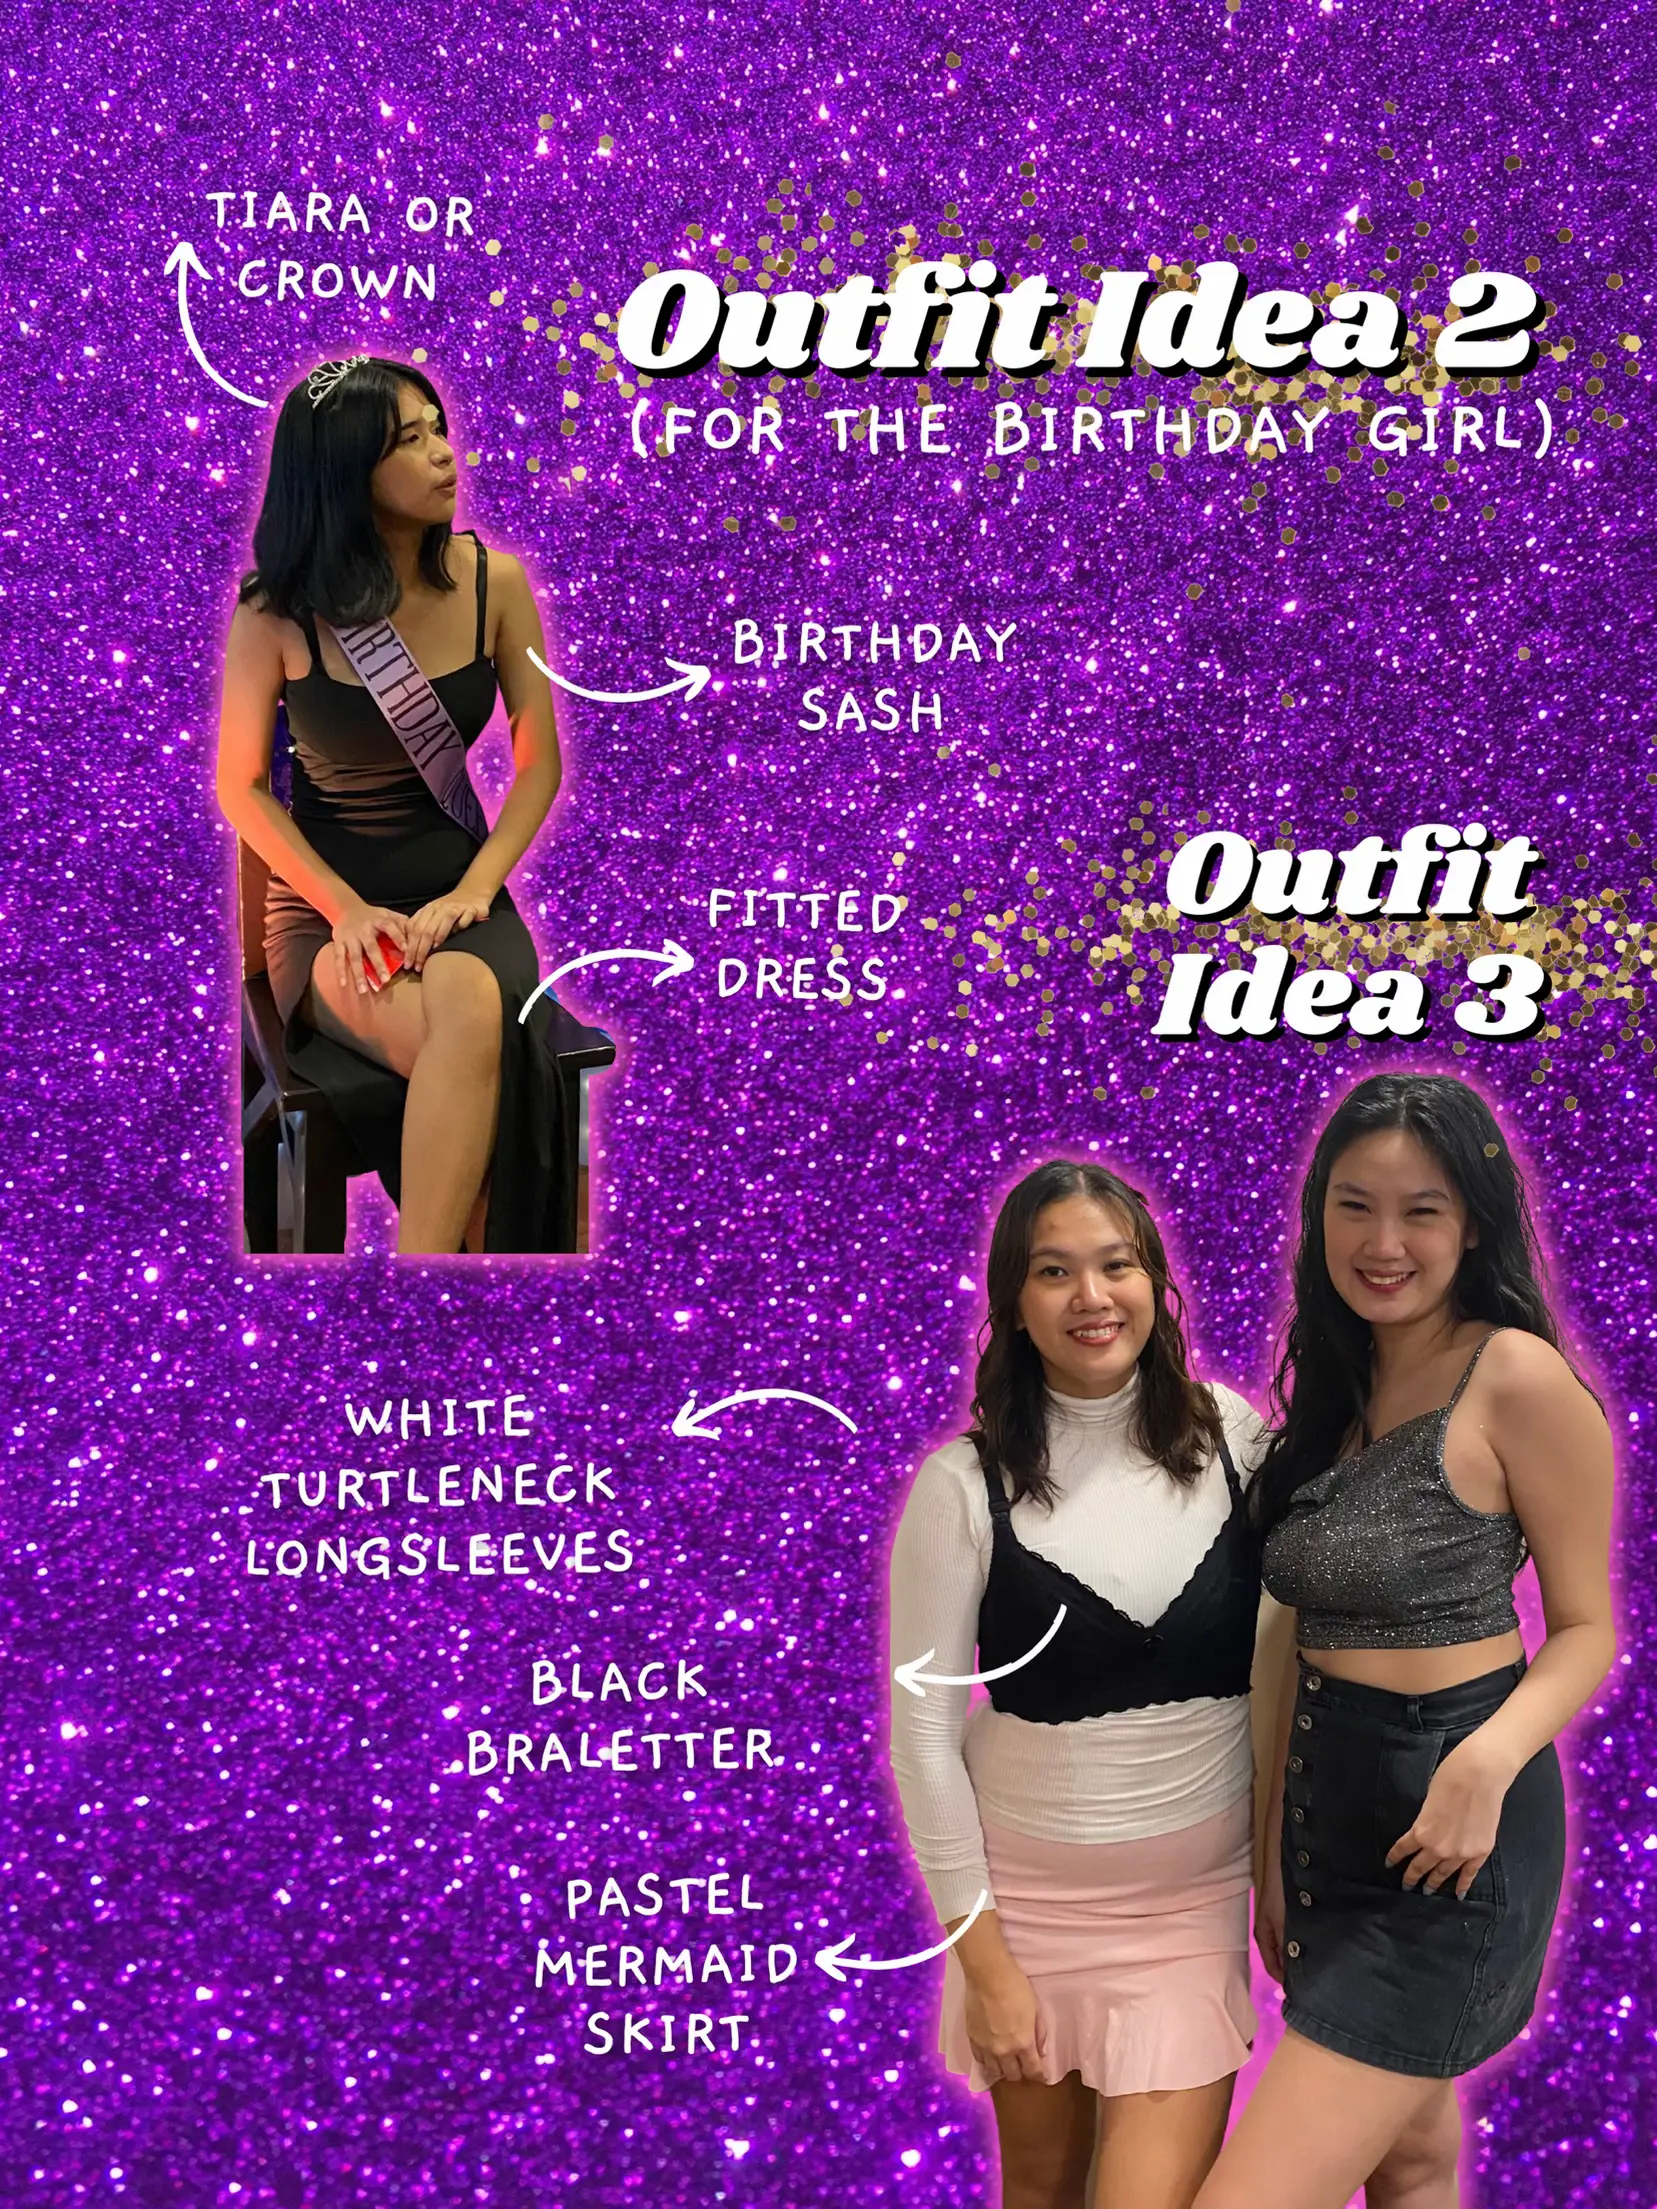 Let's go to a Euphoria-themed party + Outfit ideas